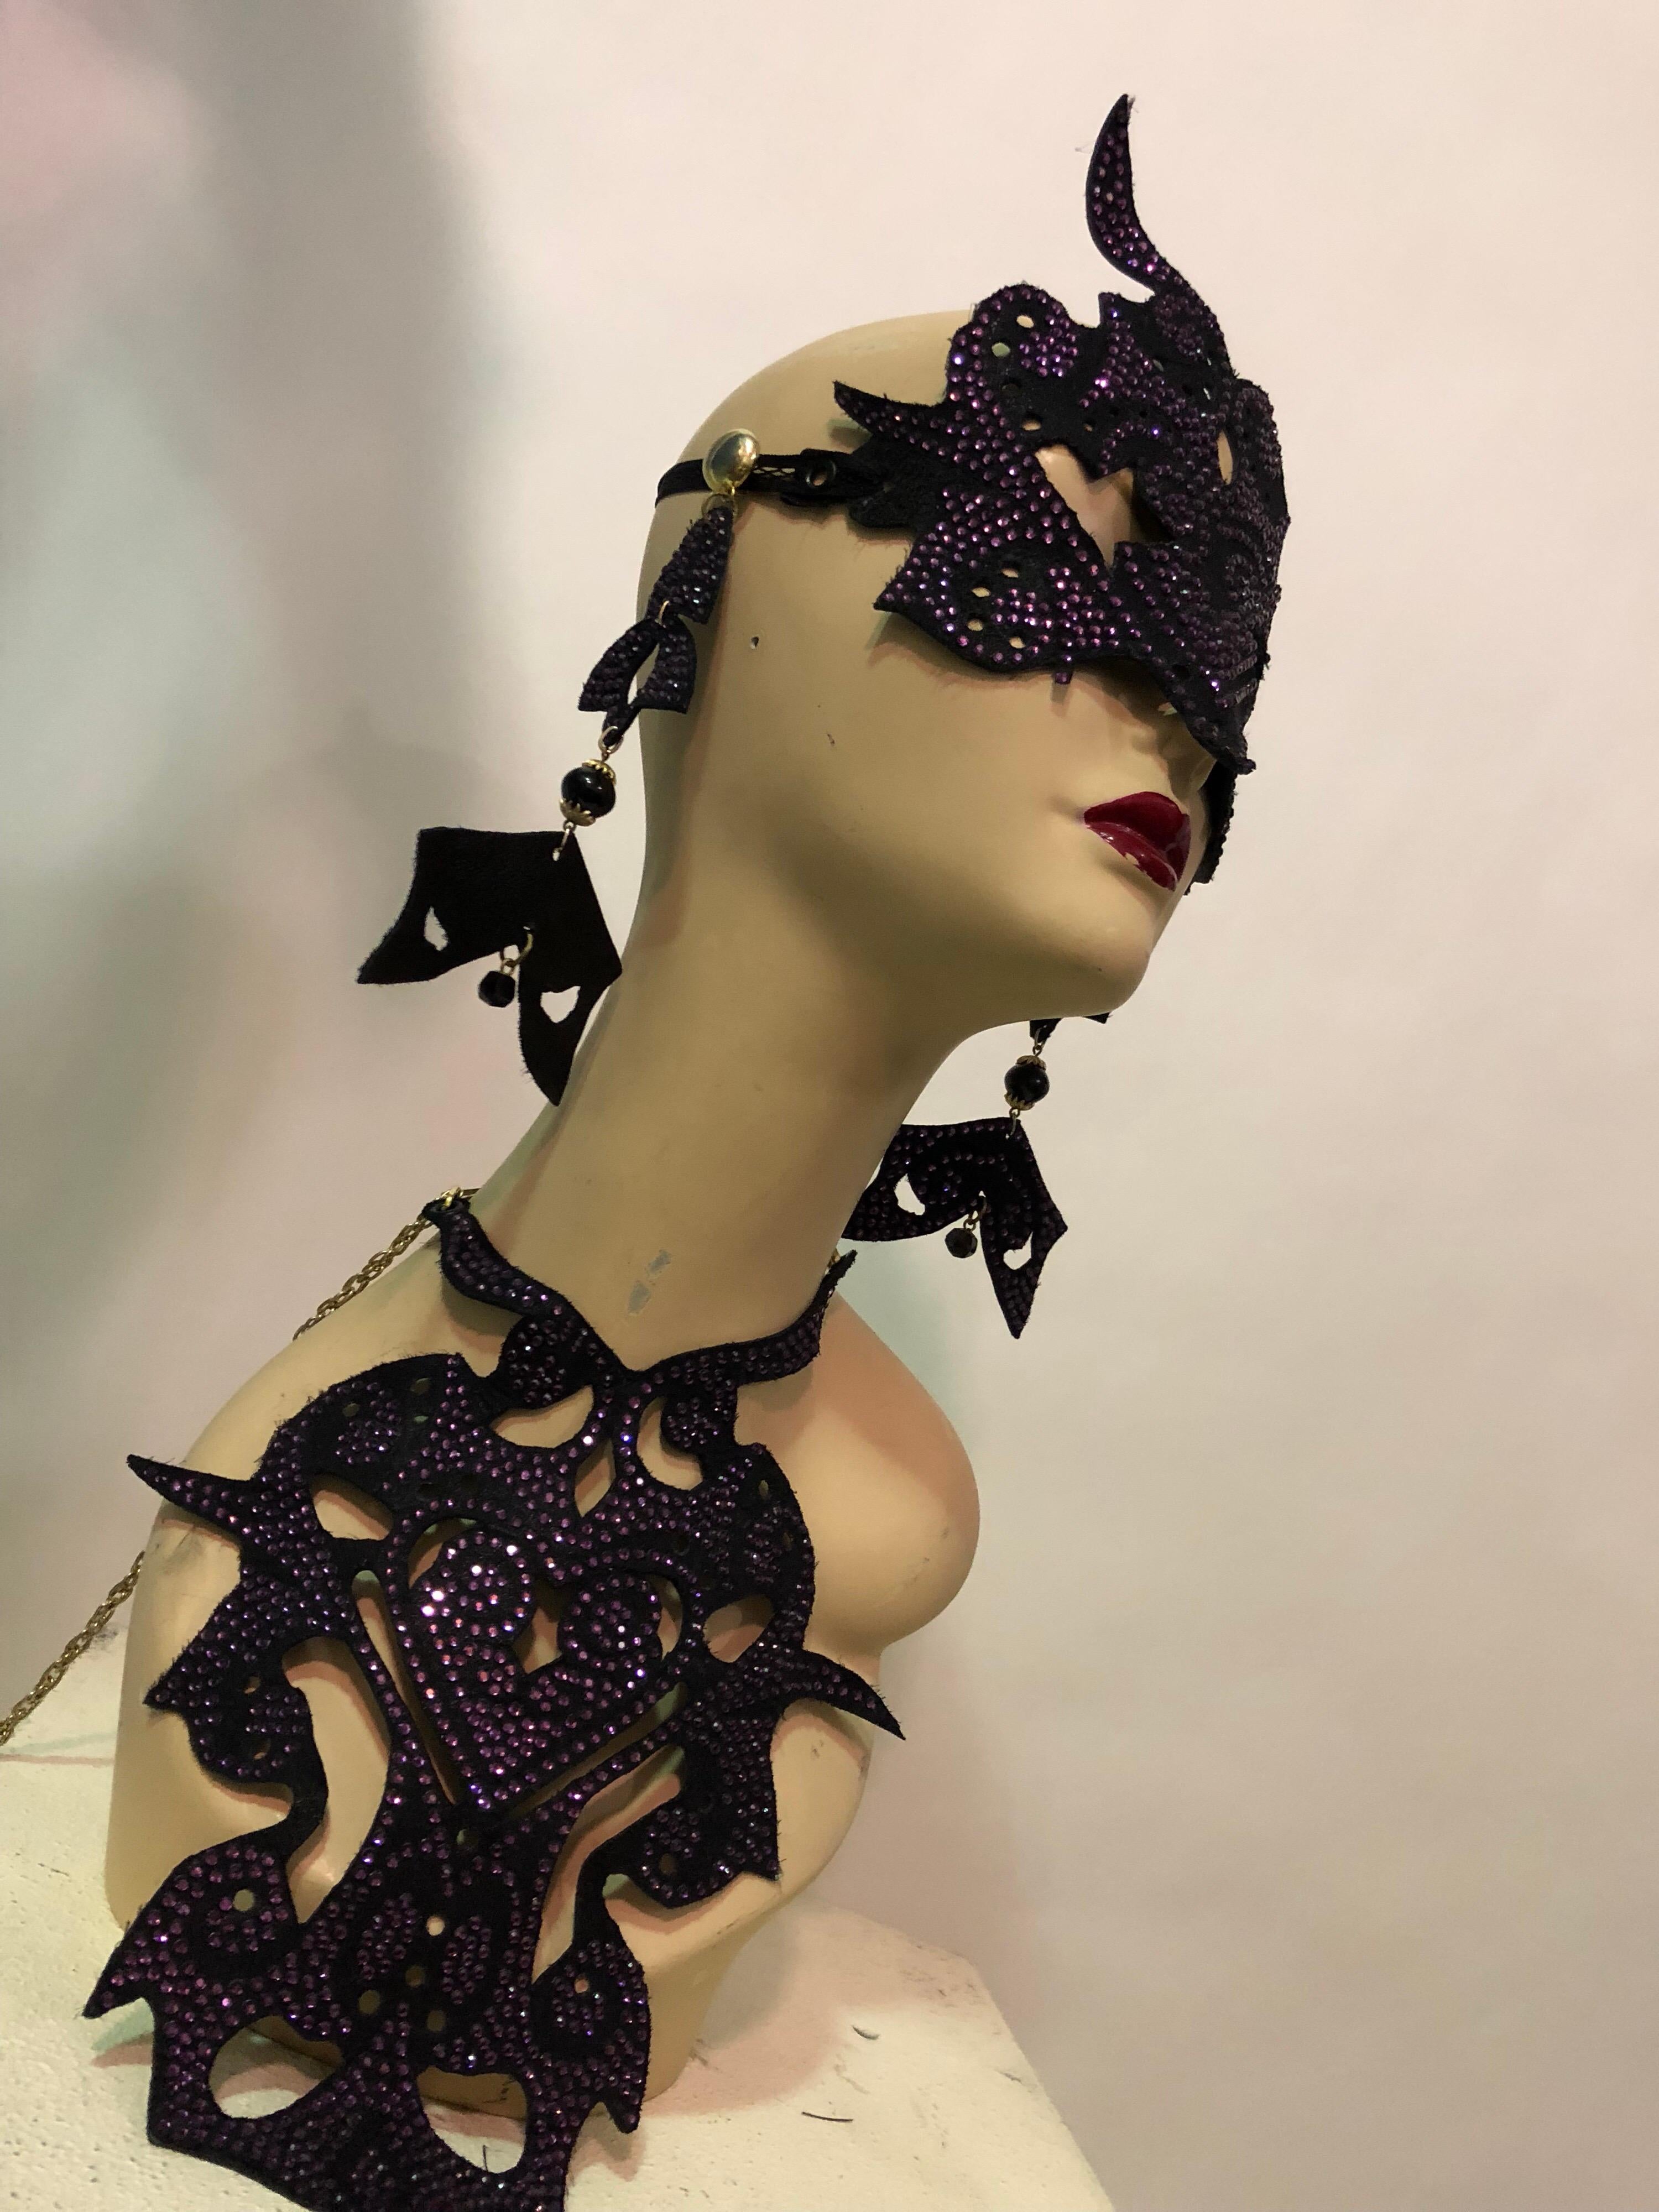 An avant garde custom made 3-piece leather mask ,earrings and bib necklace with purple crystals. Earrings are clip chandeliers. Bib collar is leather bound with tie at back. 
This ensemble is a striking look for any Masquerade Ball or Burning Man!